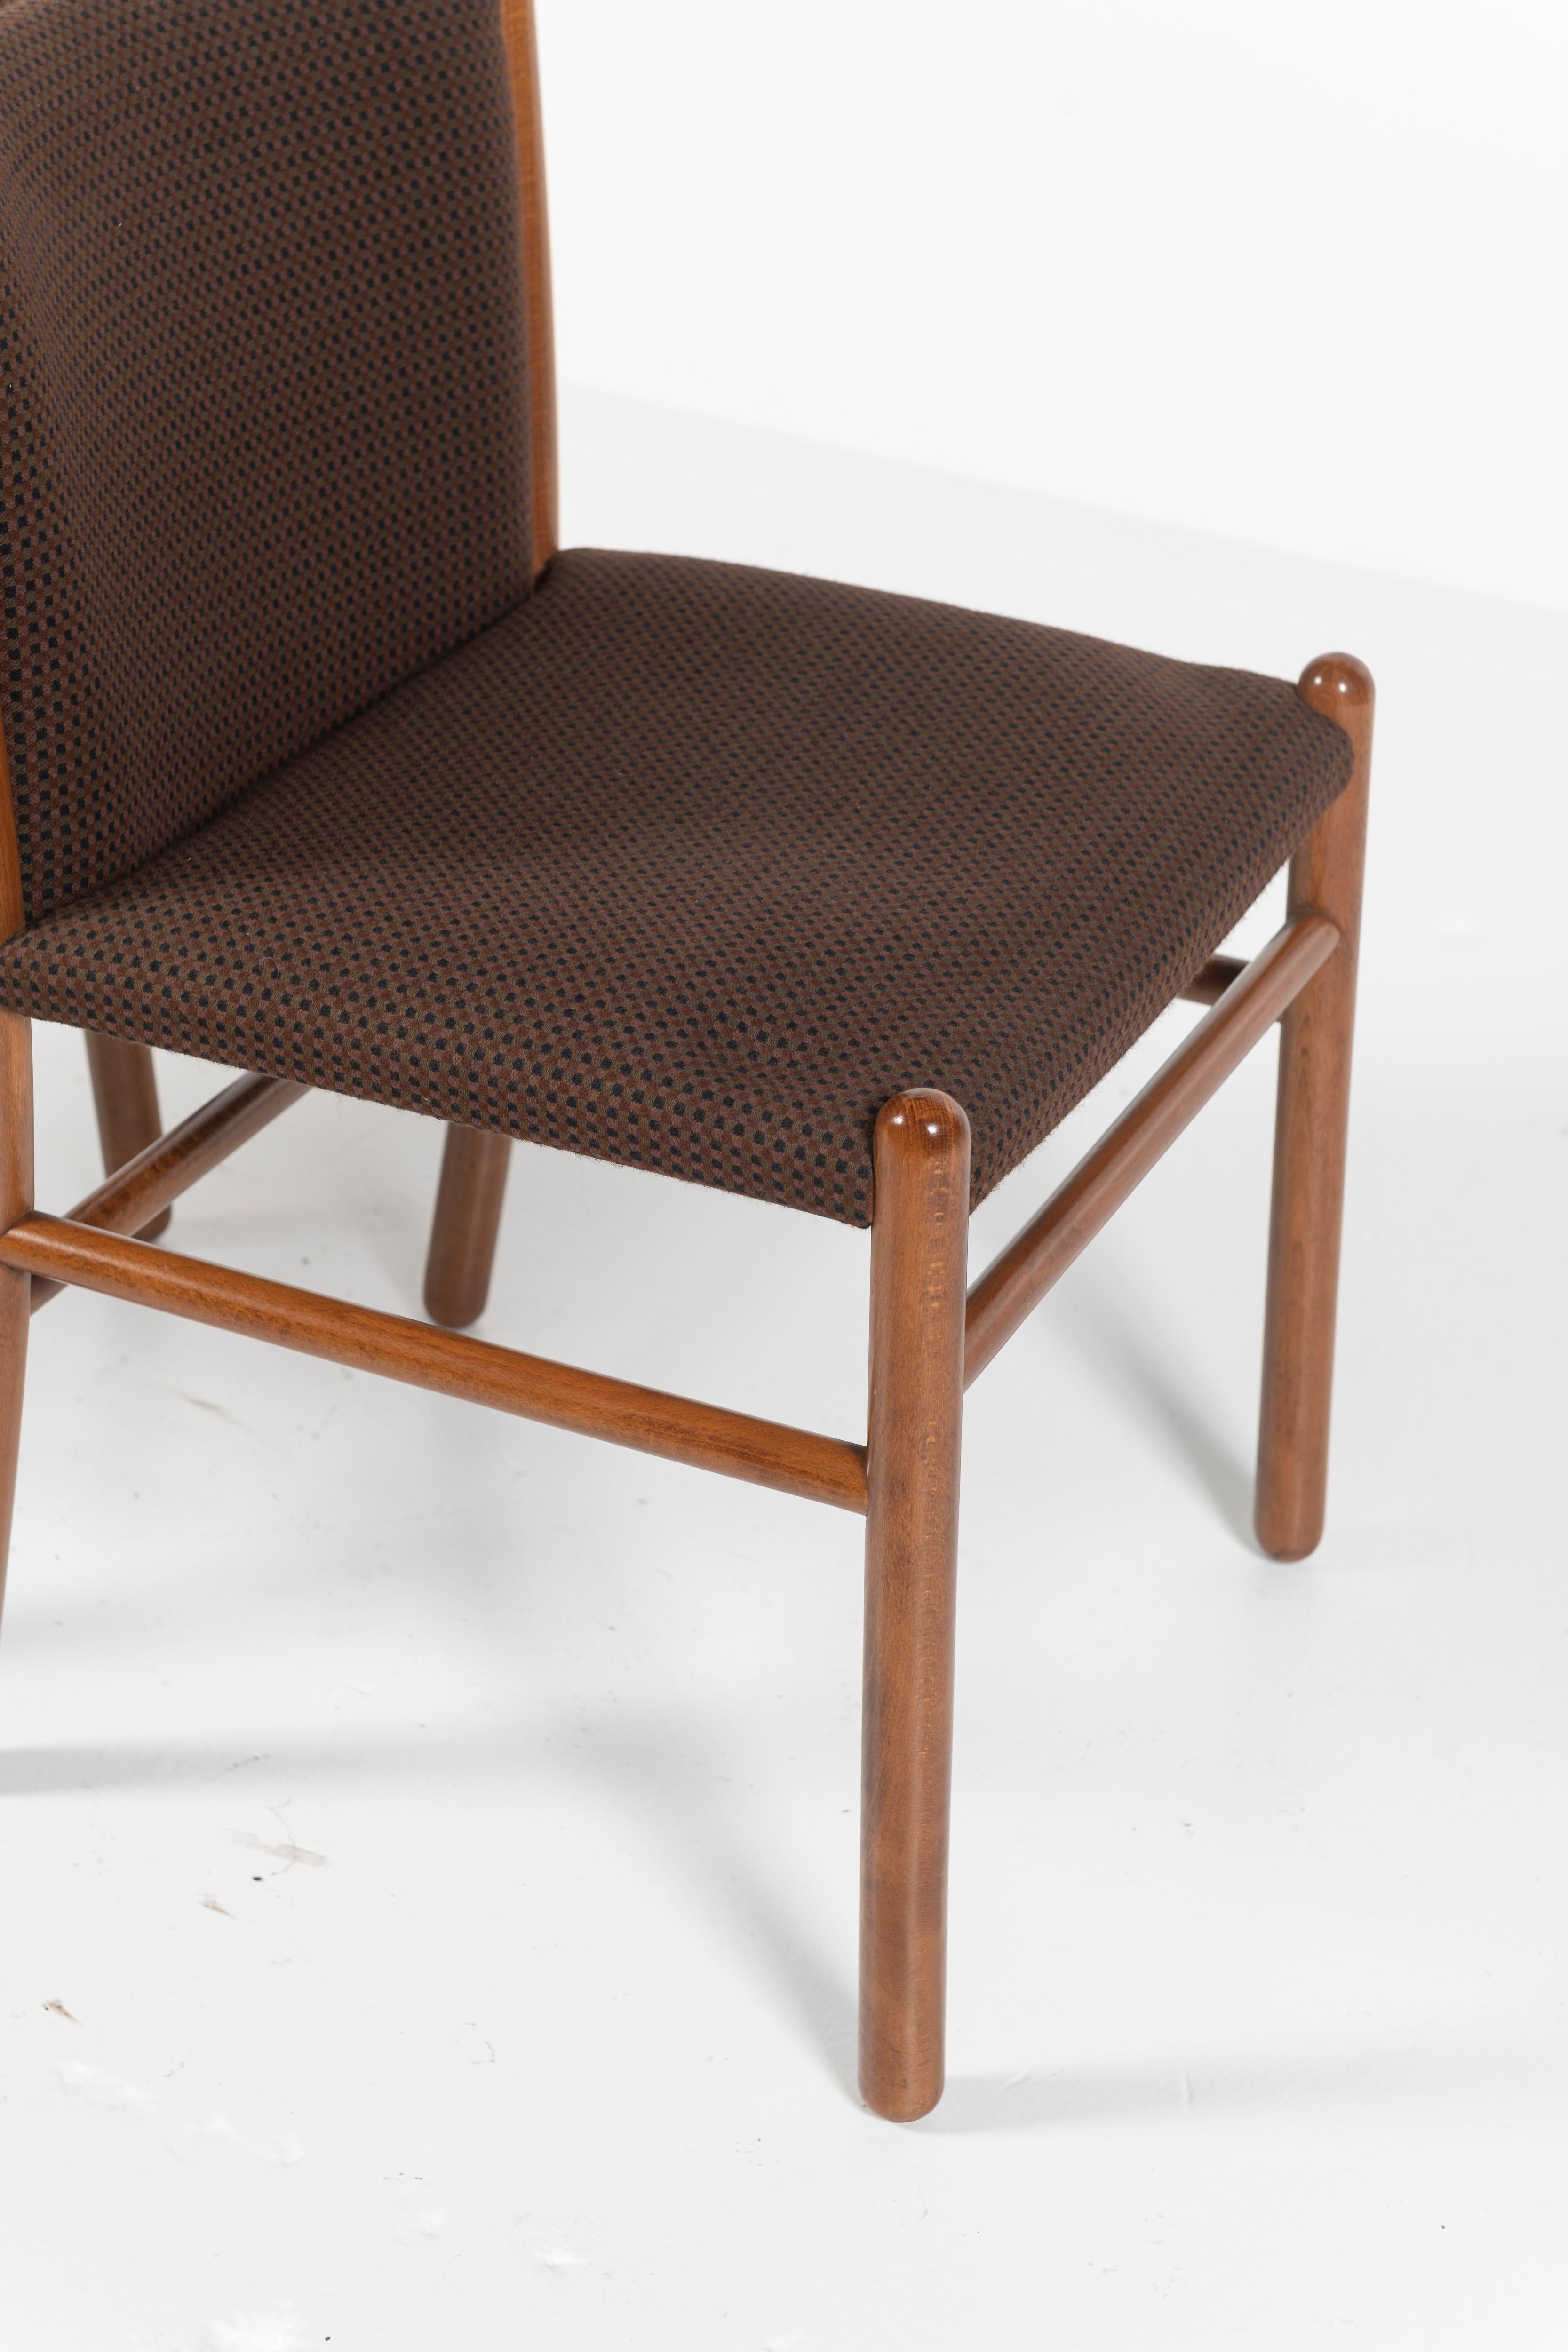 Set of Four Mid-Century Modern Dining Chairs, Gianfranco Frattini, Italy, 1960s For Sale 5